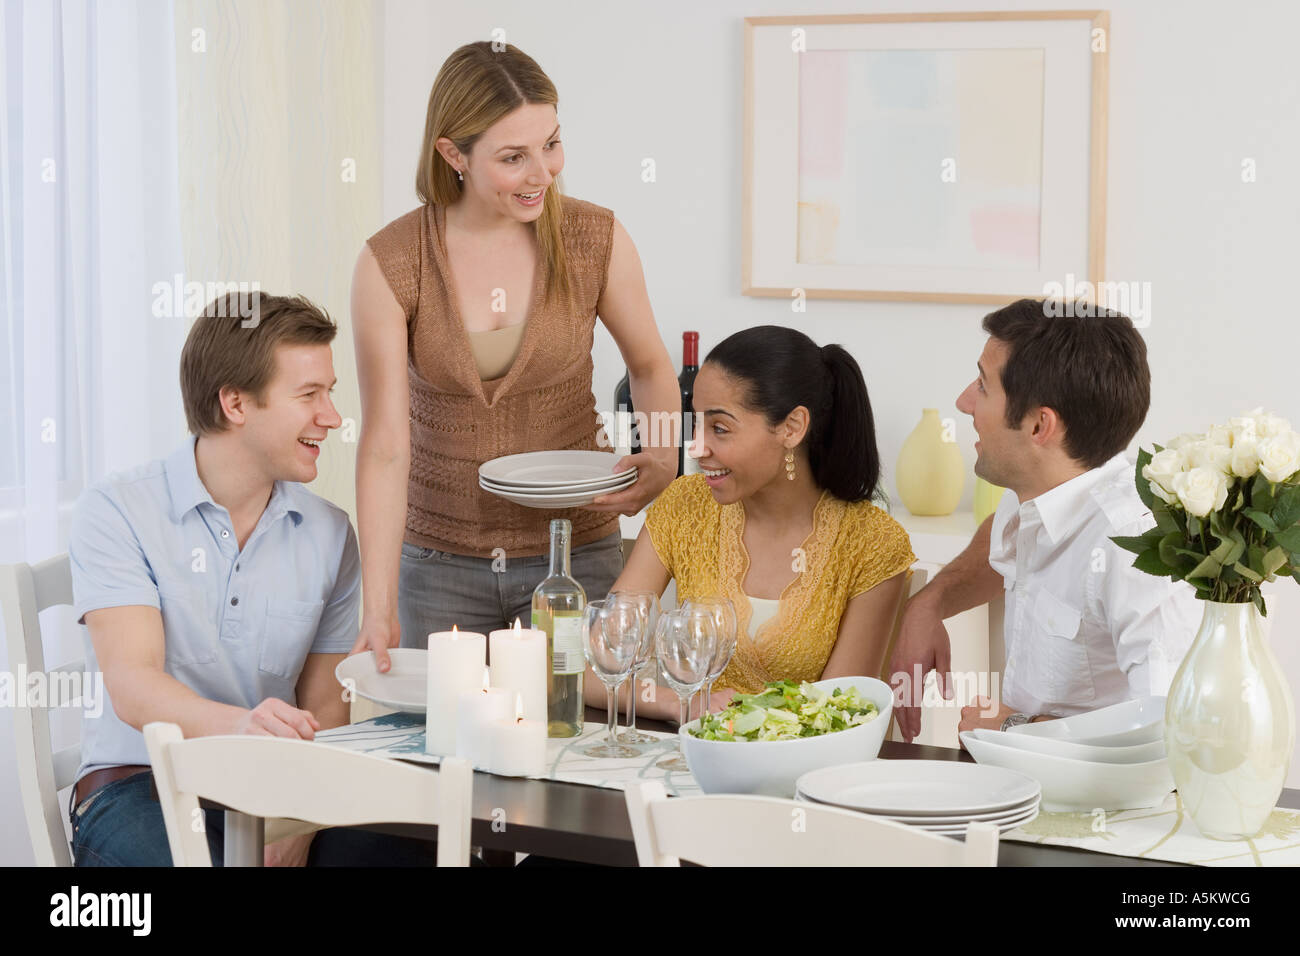 Two couples having dinner party Stock Photo